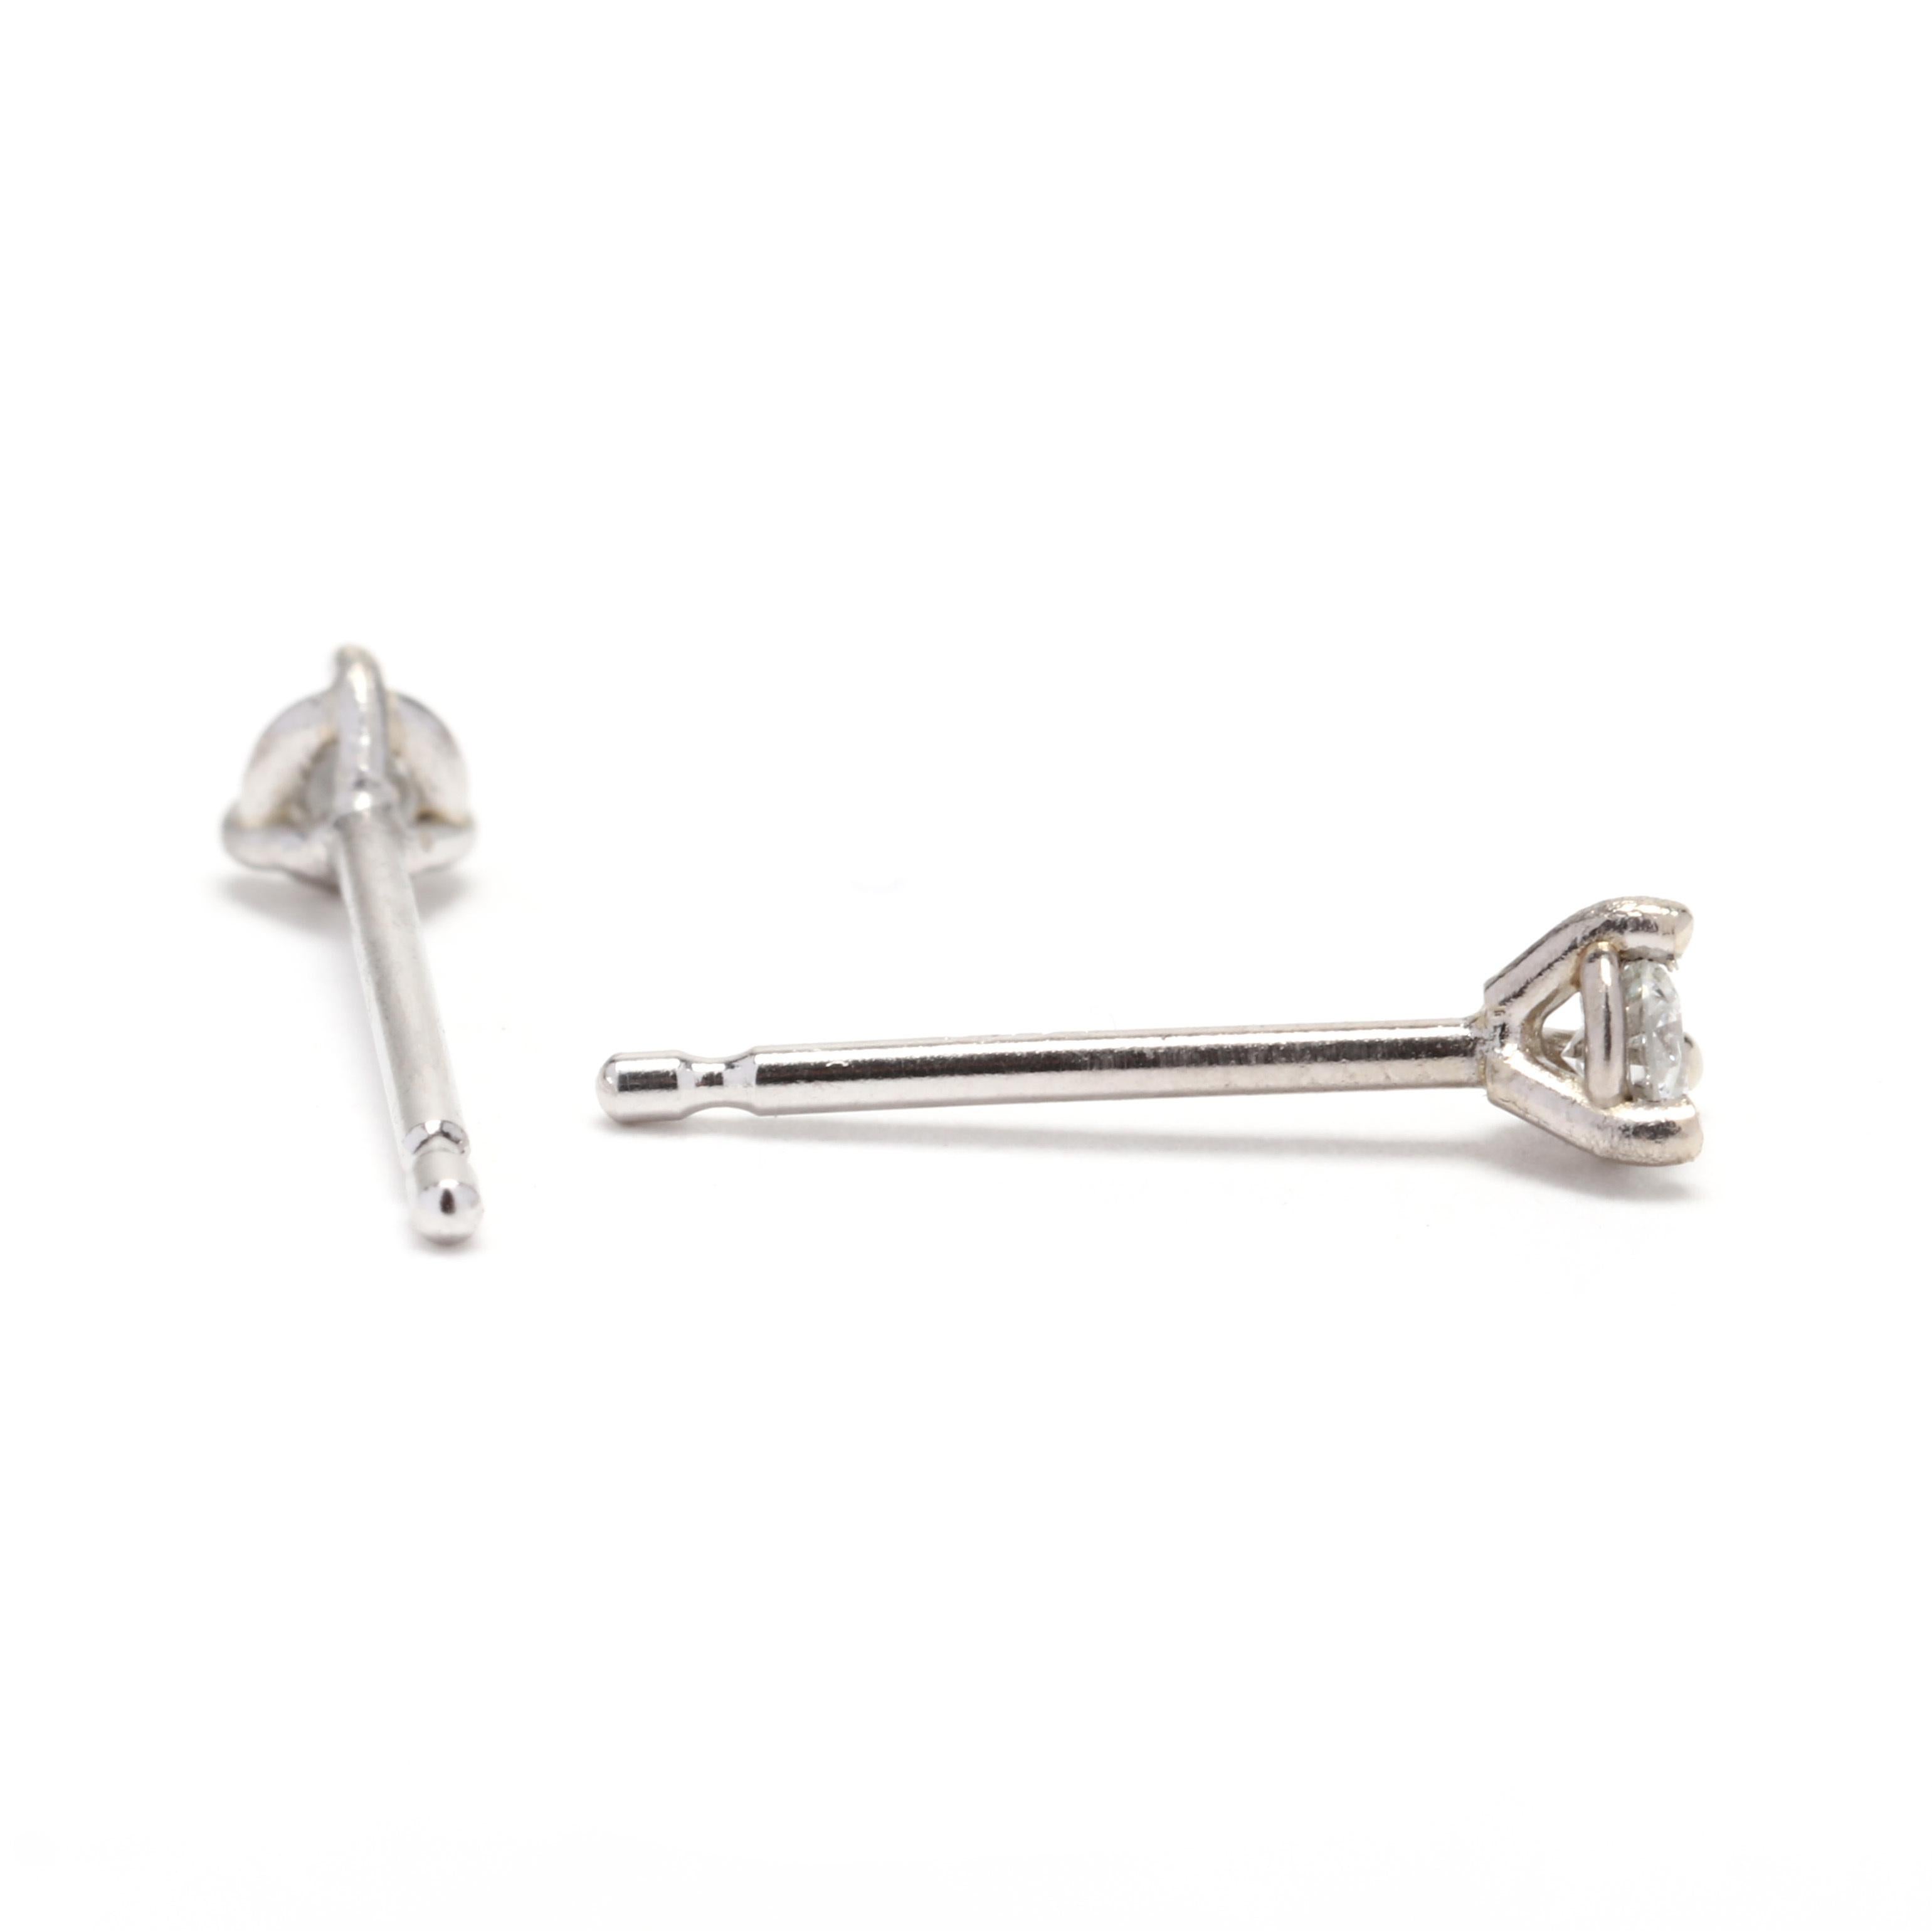 A pair of 14 karat white gold diamond stud earrings. These earrings feature full cut round diamonds weighing approximately .12 total carats set in a martini 3 prong setting with pierced butterfly backings.



Stones:

- diamonds, 2 stones

- full